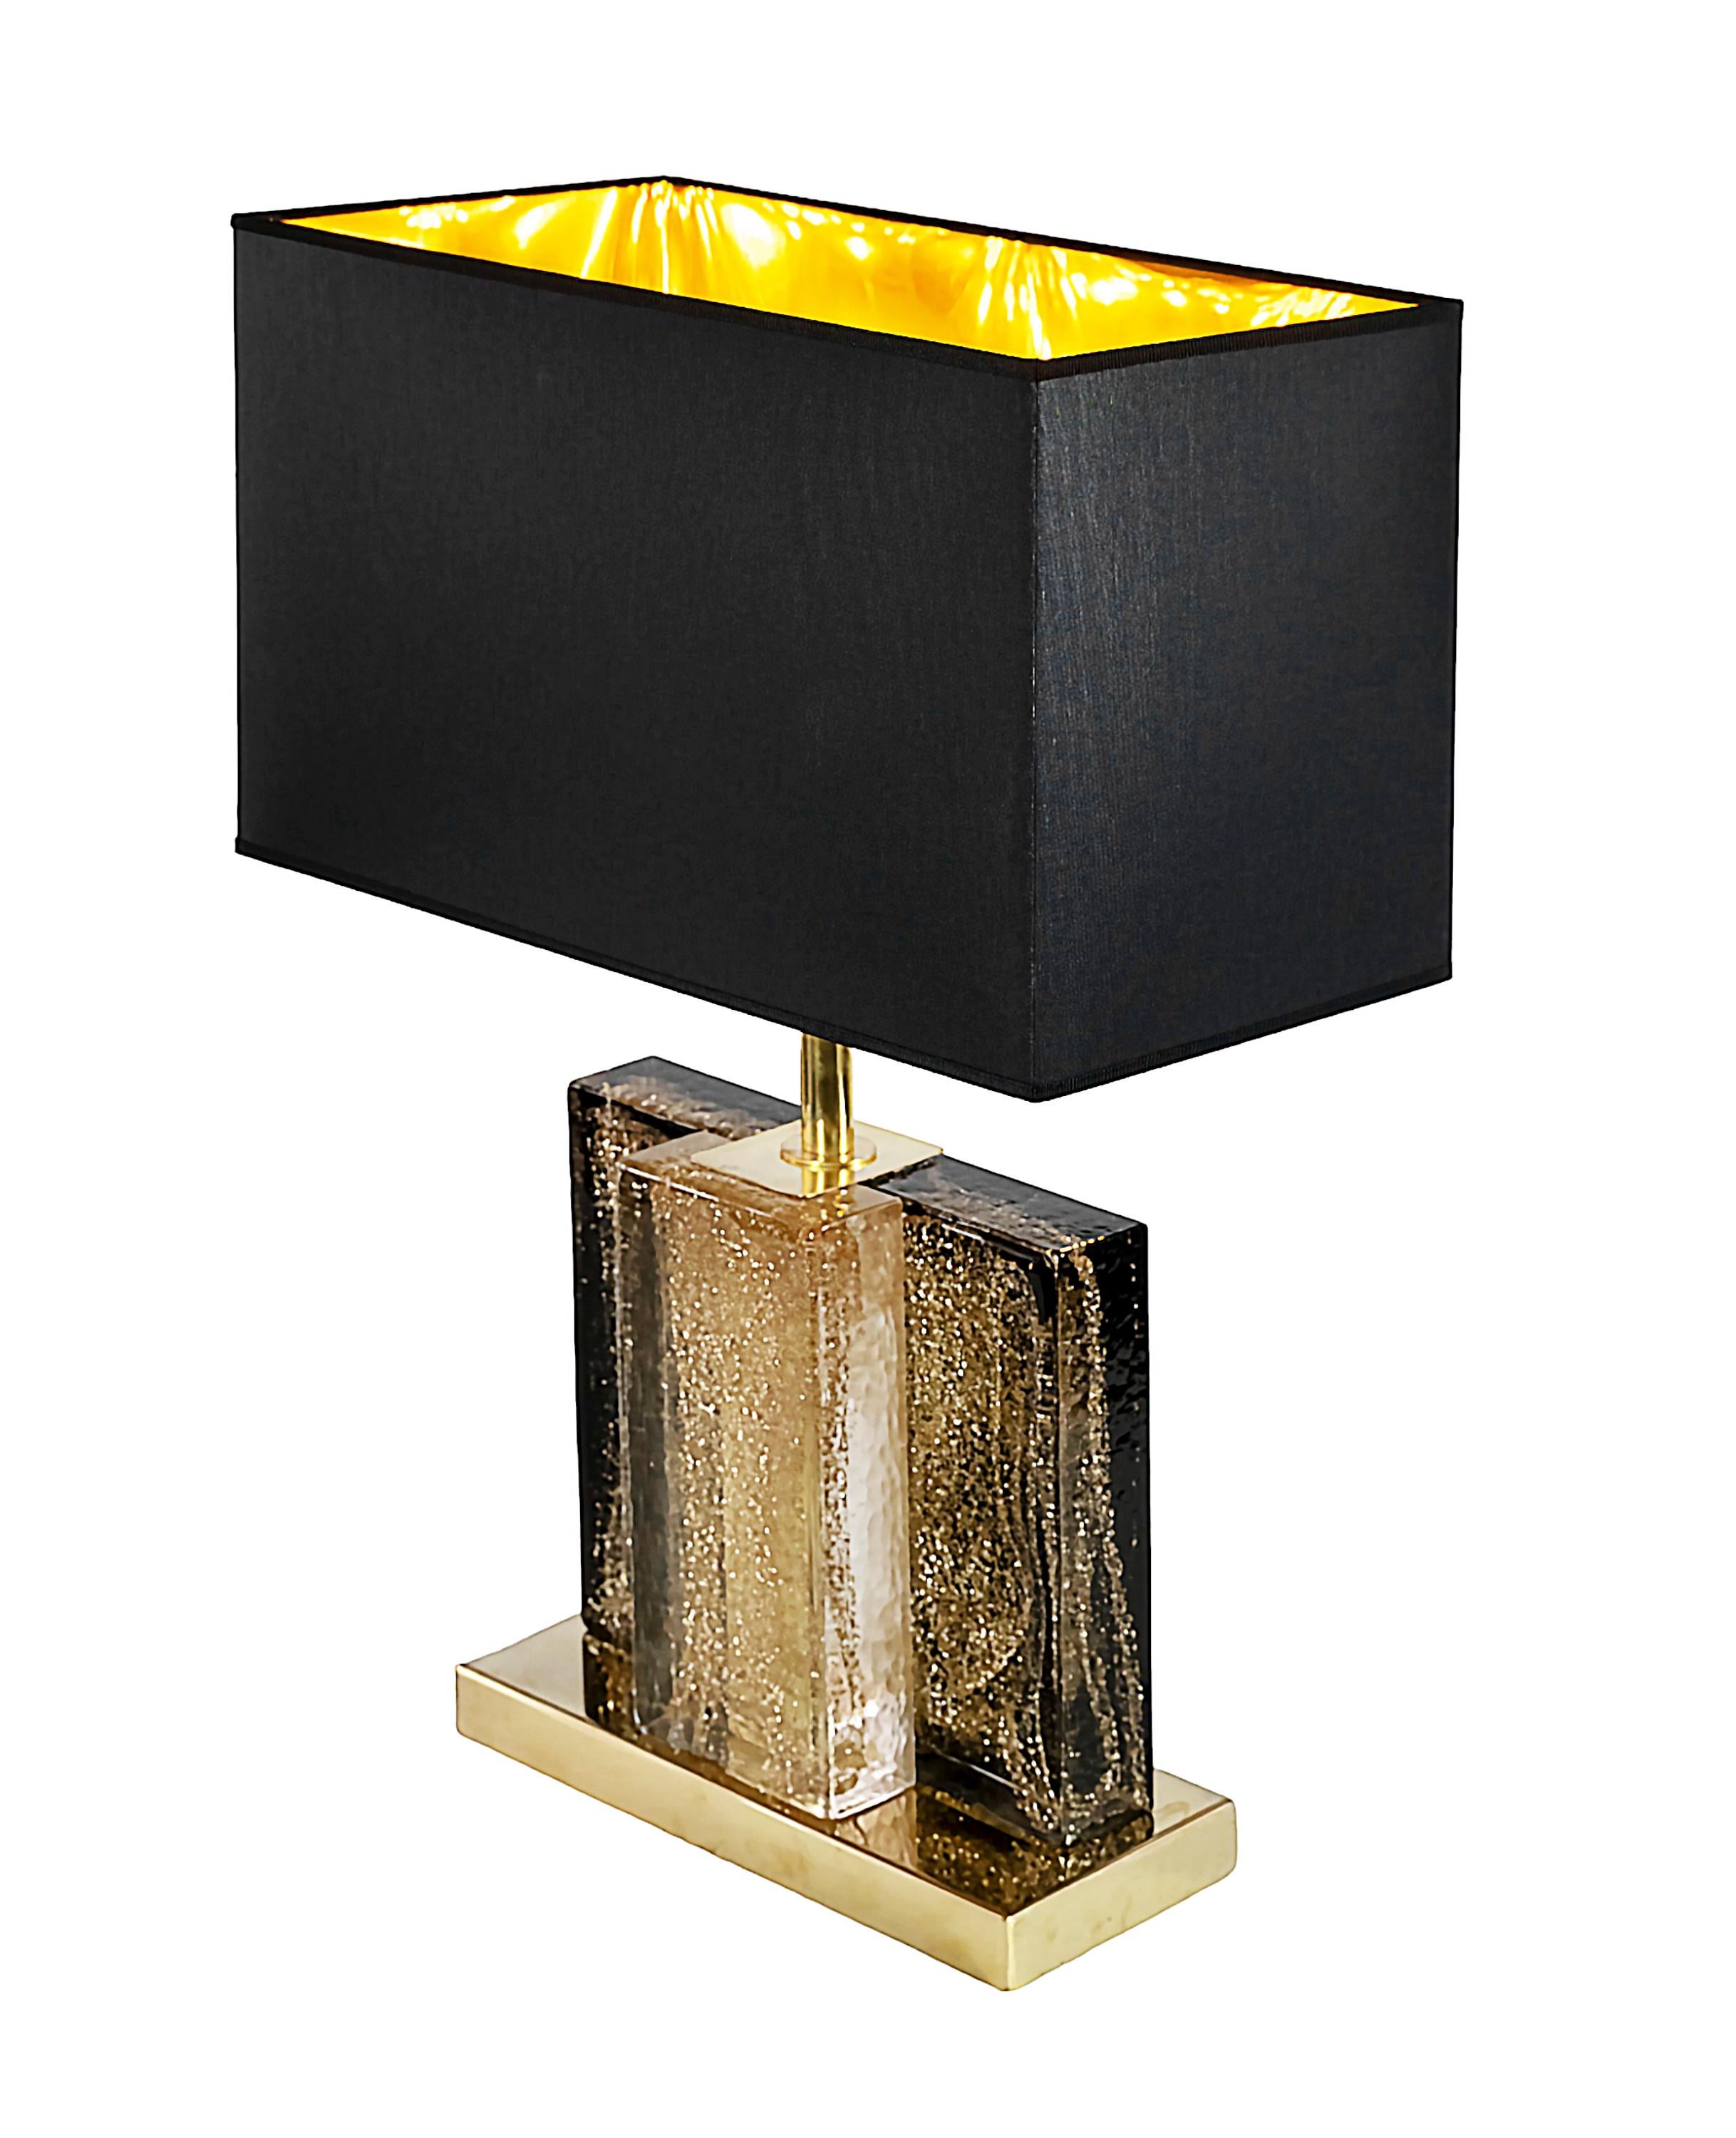 Pair of Italian table lamps.
The base is made in brass. The glass part is handmade Murano glass with inside gold dust.
Both lamps are with new made satin finish black color textile shades with gold inside.
Bulbs E27.

